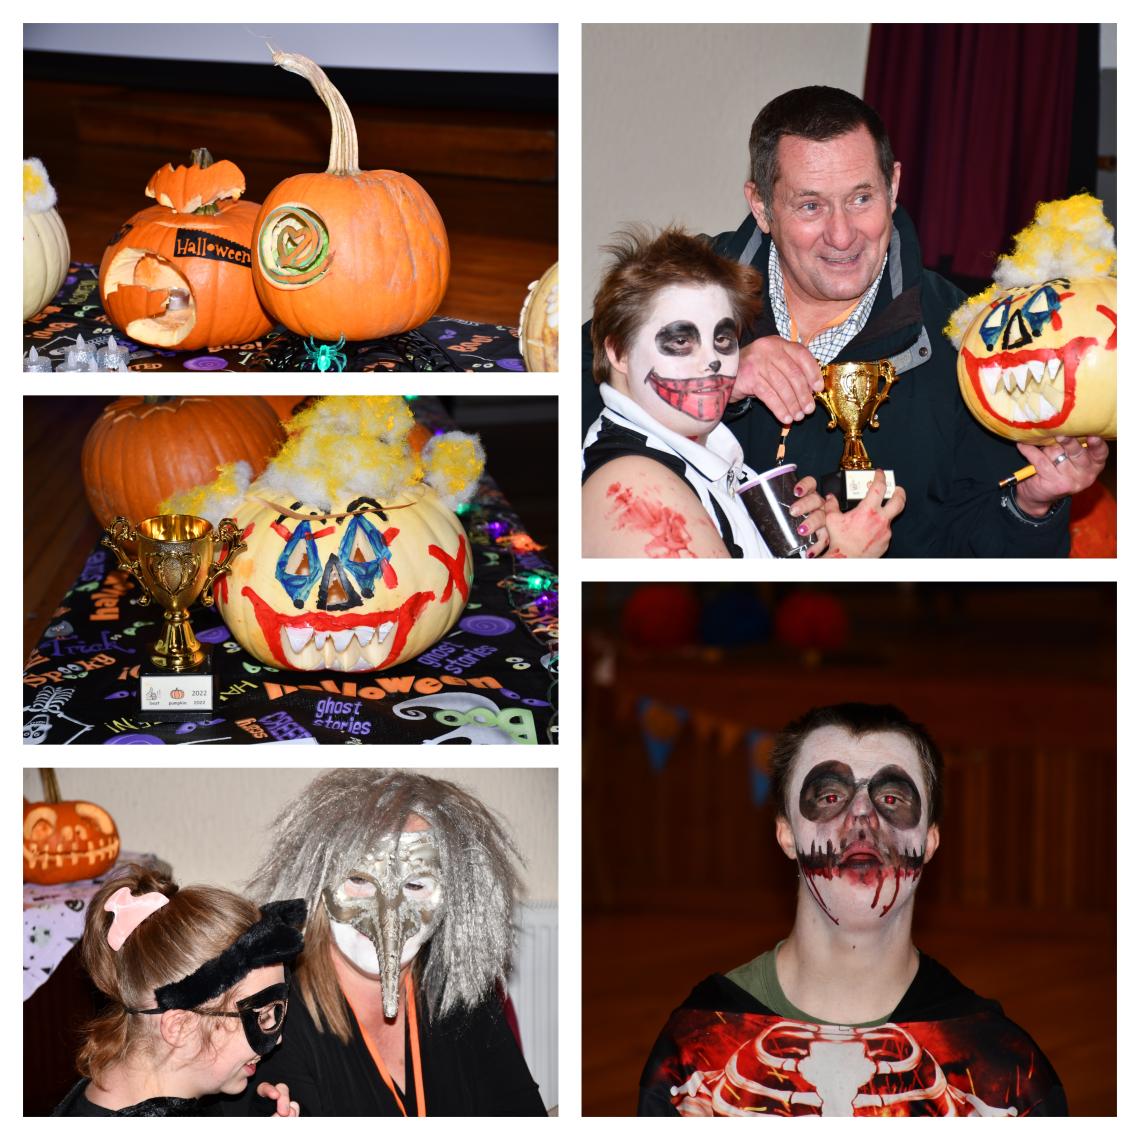 A collage of images showing people dressed up for Halloween & some carved pumpkins.